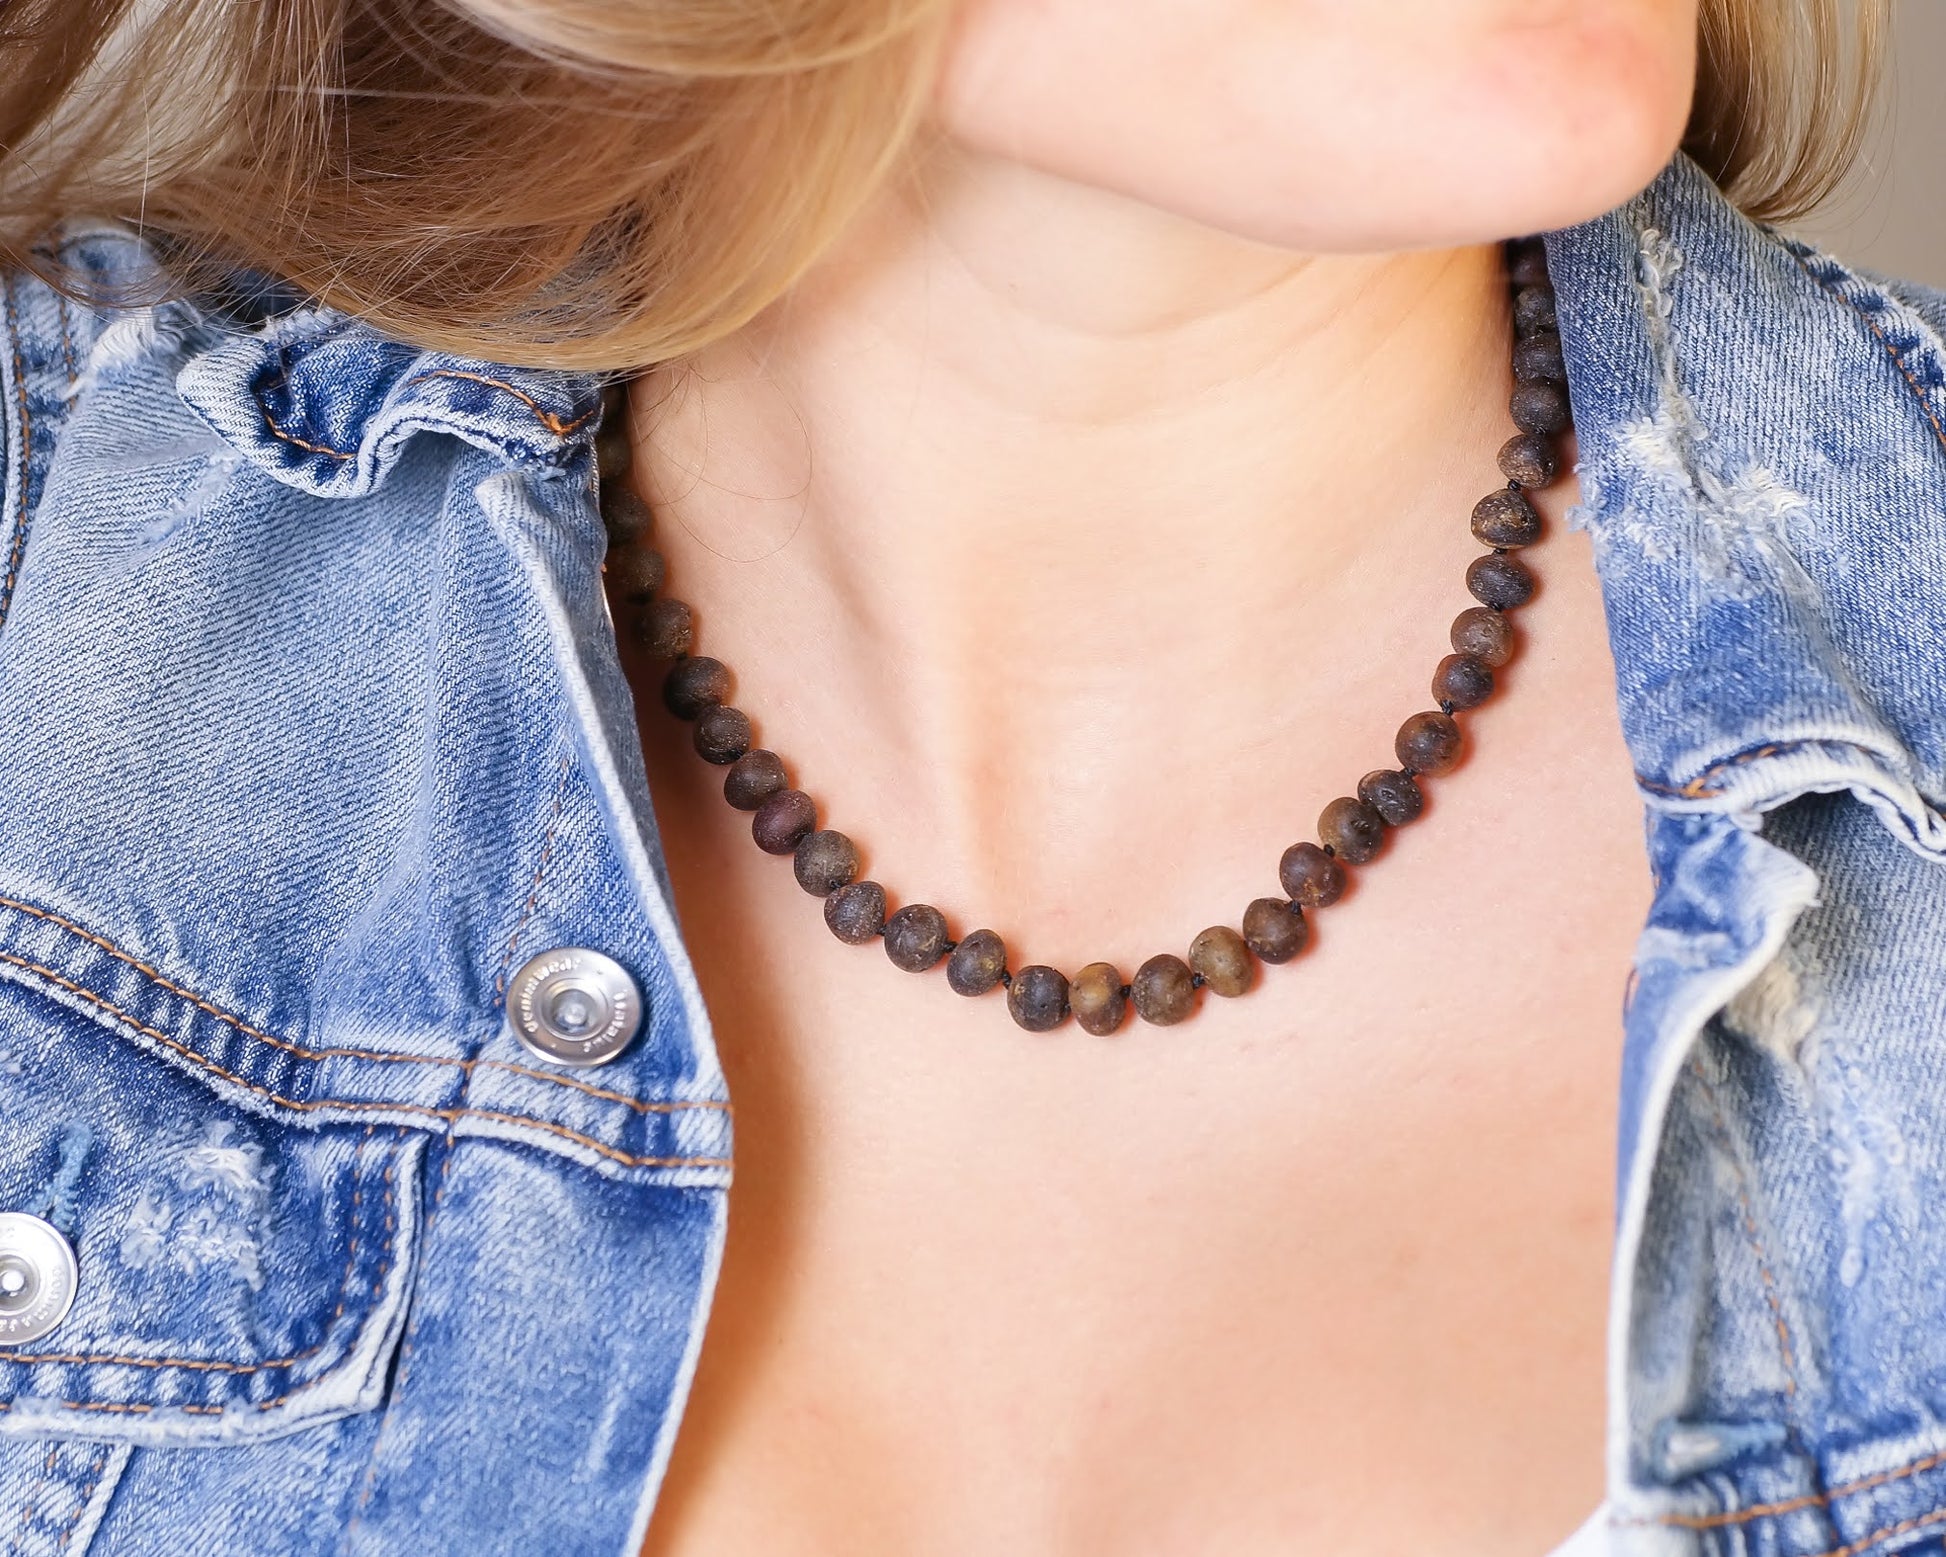 Healing Amber Necklace